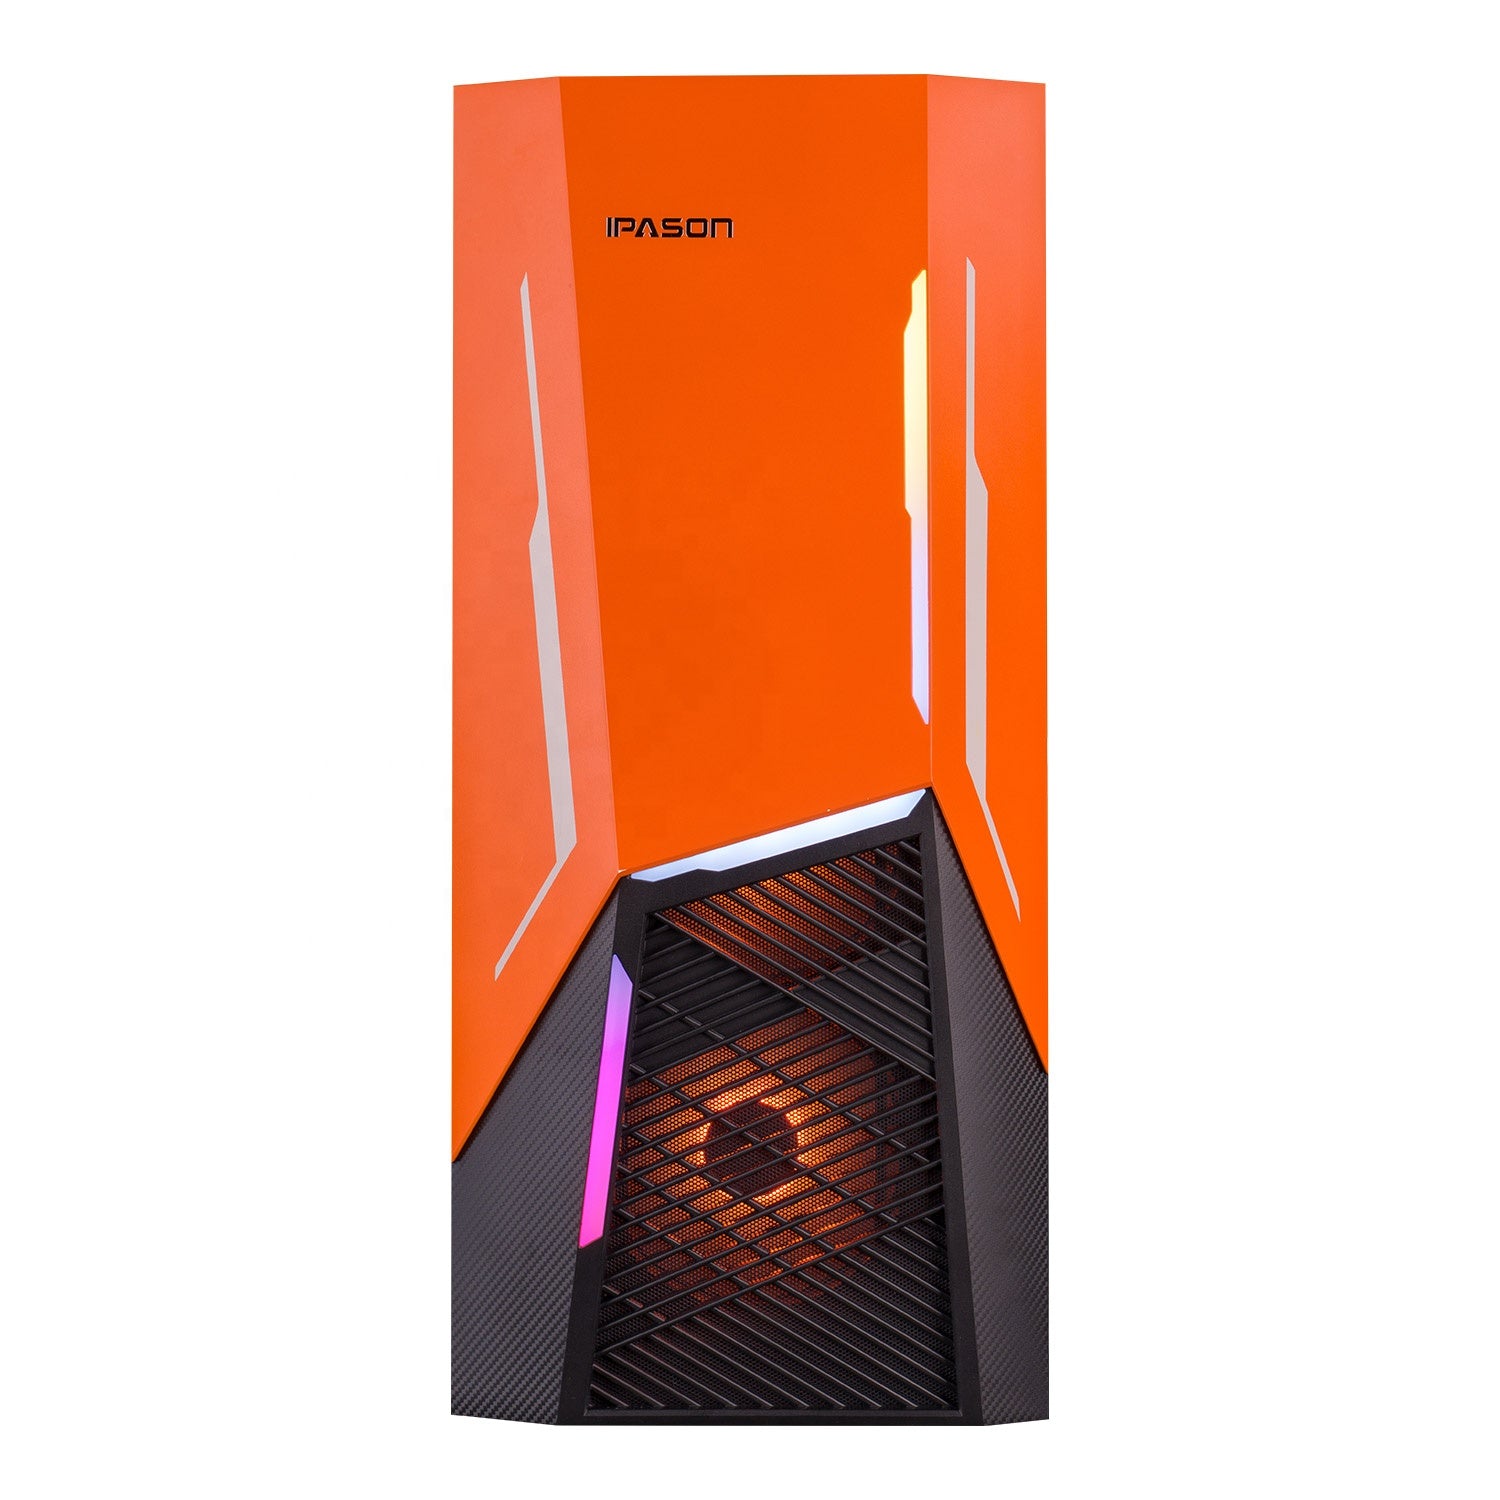 DeepGaming - PC Gamer Nostromo Pro Intel Core i7-12700F - RAM 32Go - 1To  SSD PCIe4.0 + 1To HDD - Nvidia RTX3050 - FDOS - DeepGaming